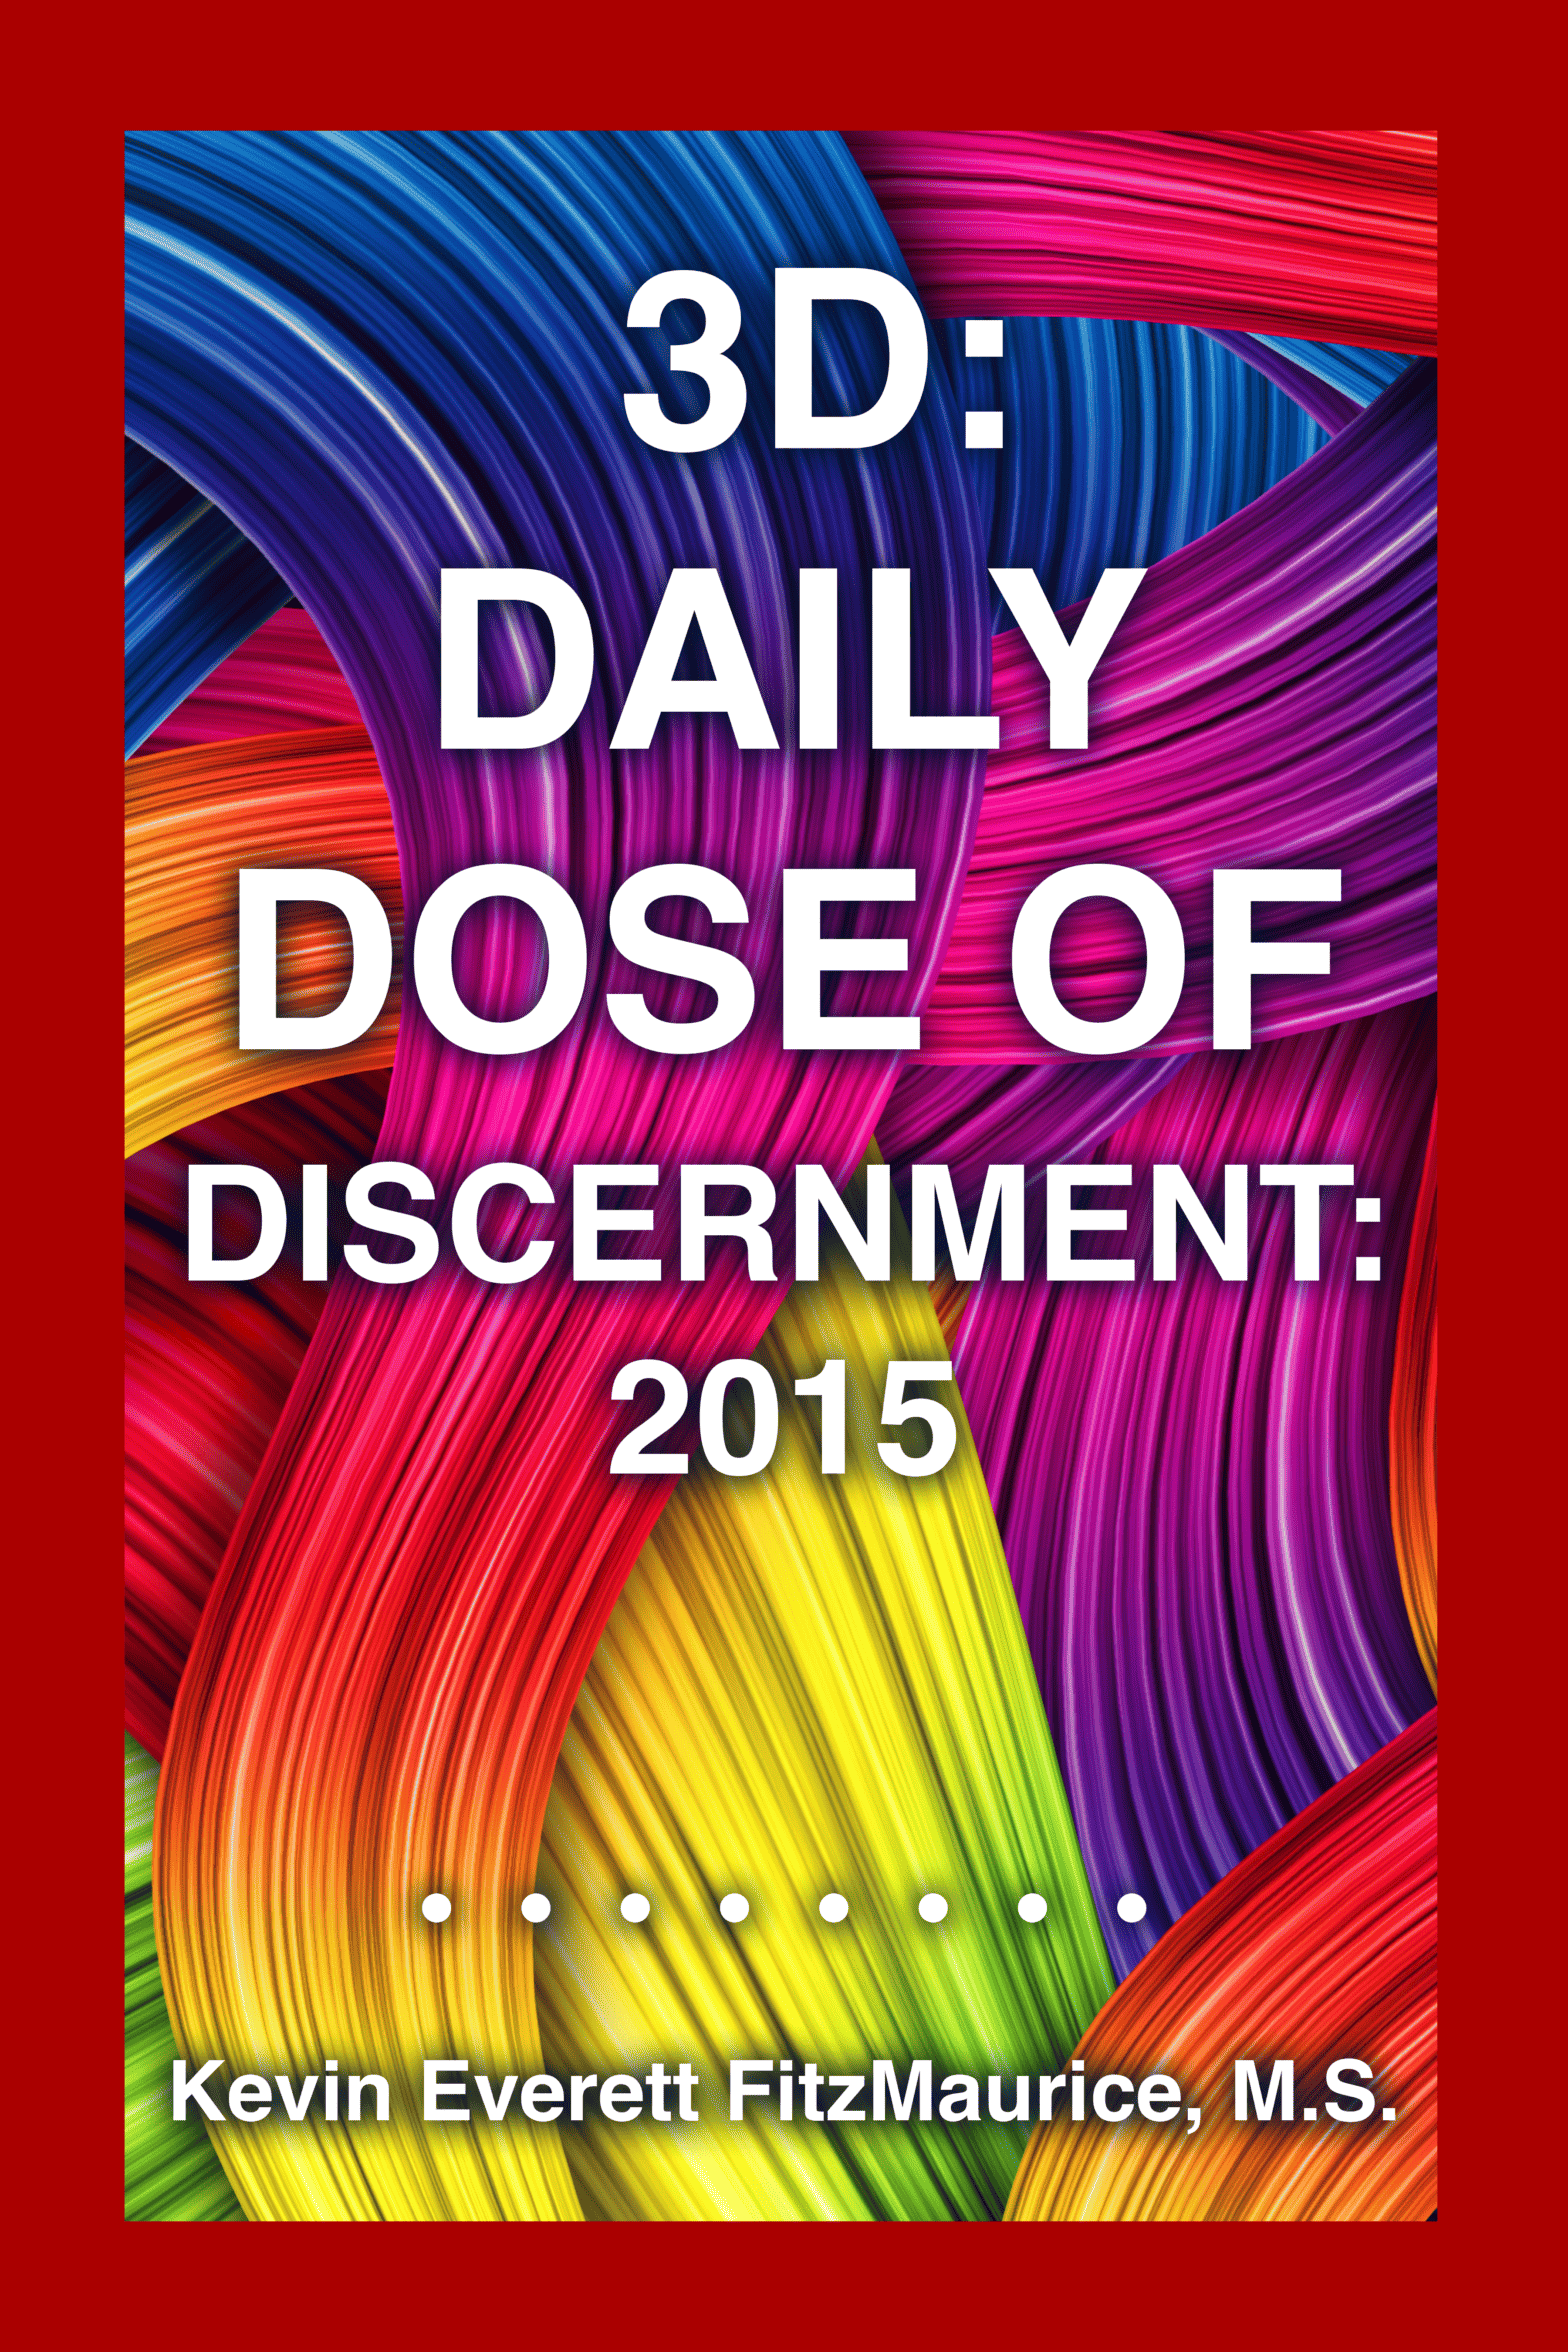 3D: Daily Dose of Discernment: 2015 book cover